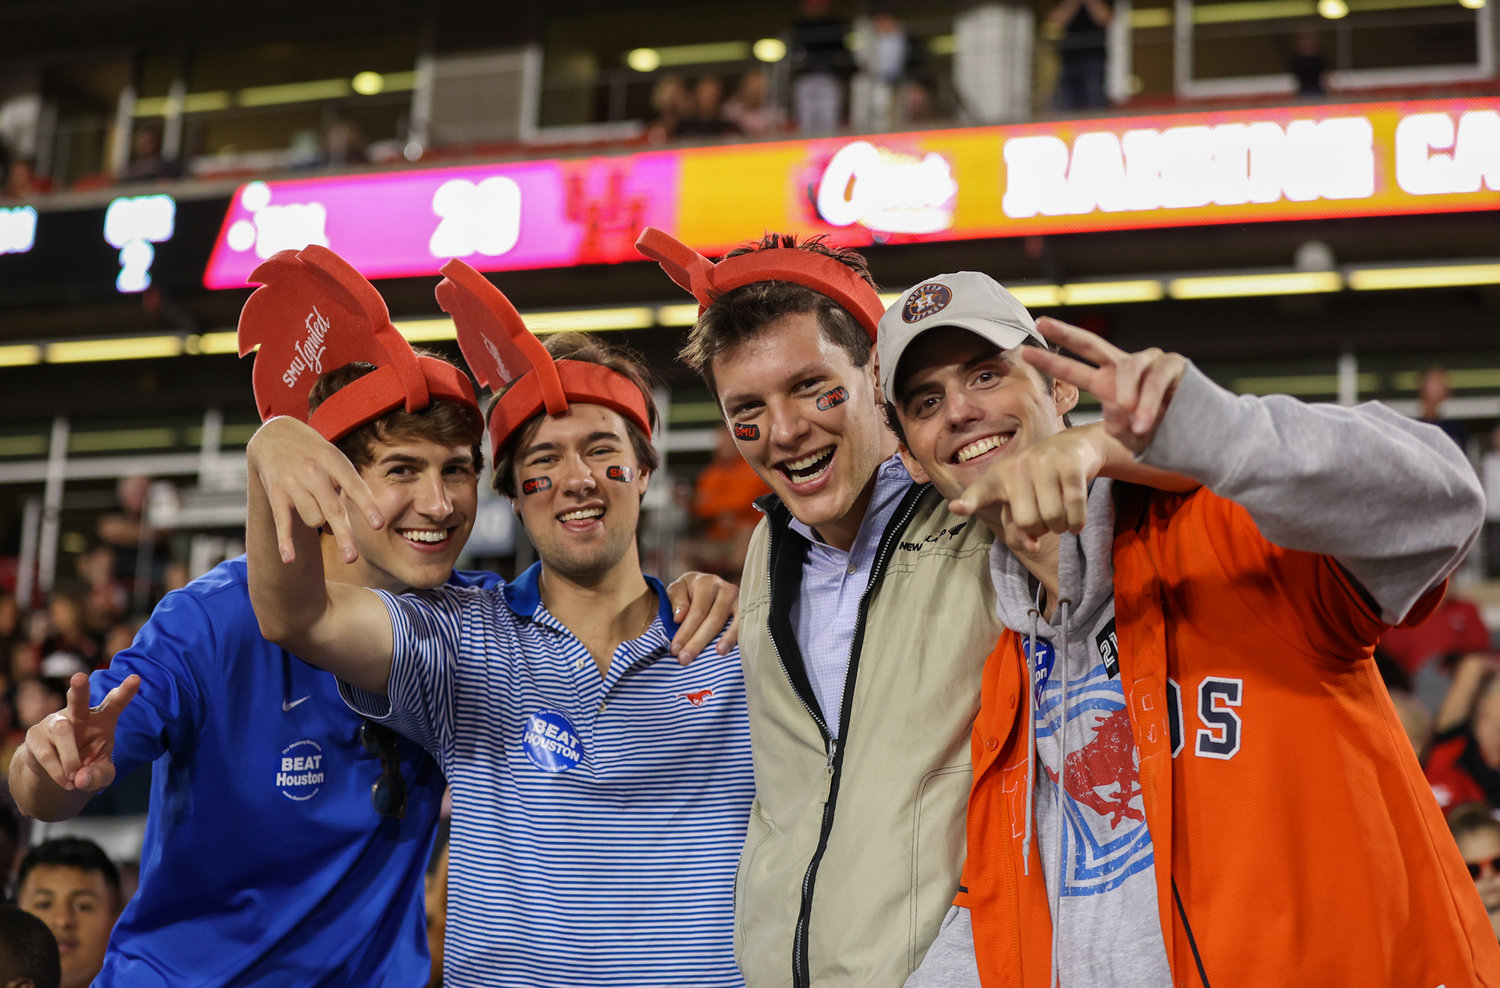 A group of SMU students occupy seats in the home section during an NCAA football game between Houston and SMU on October 30, 2021 in Houston, Texas.